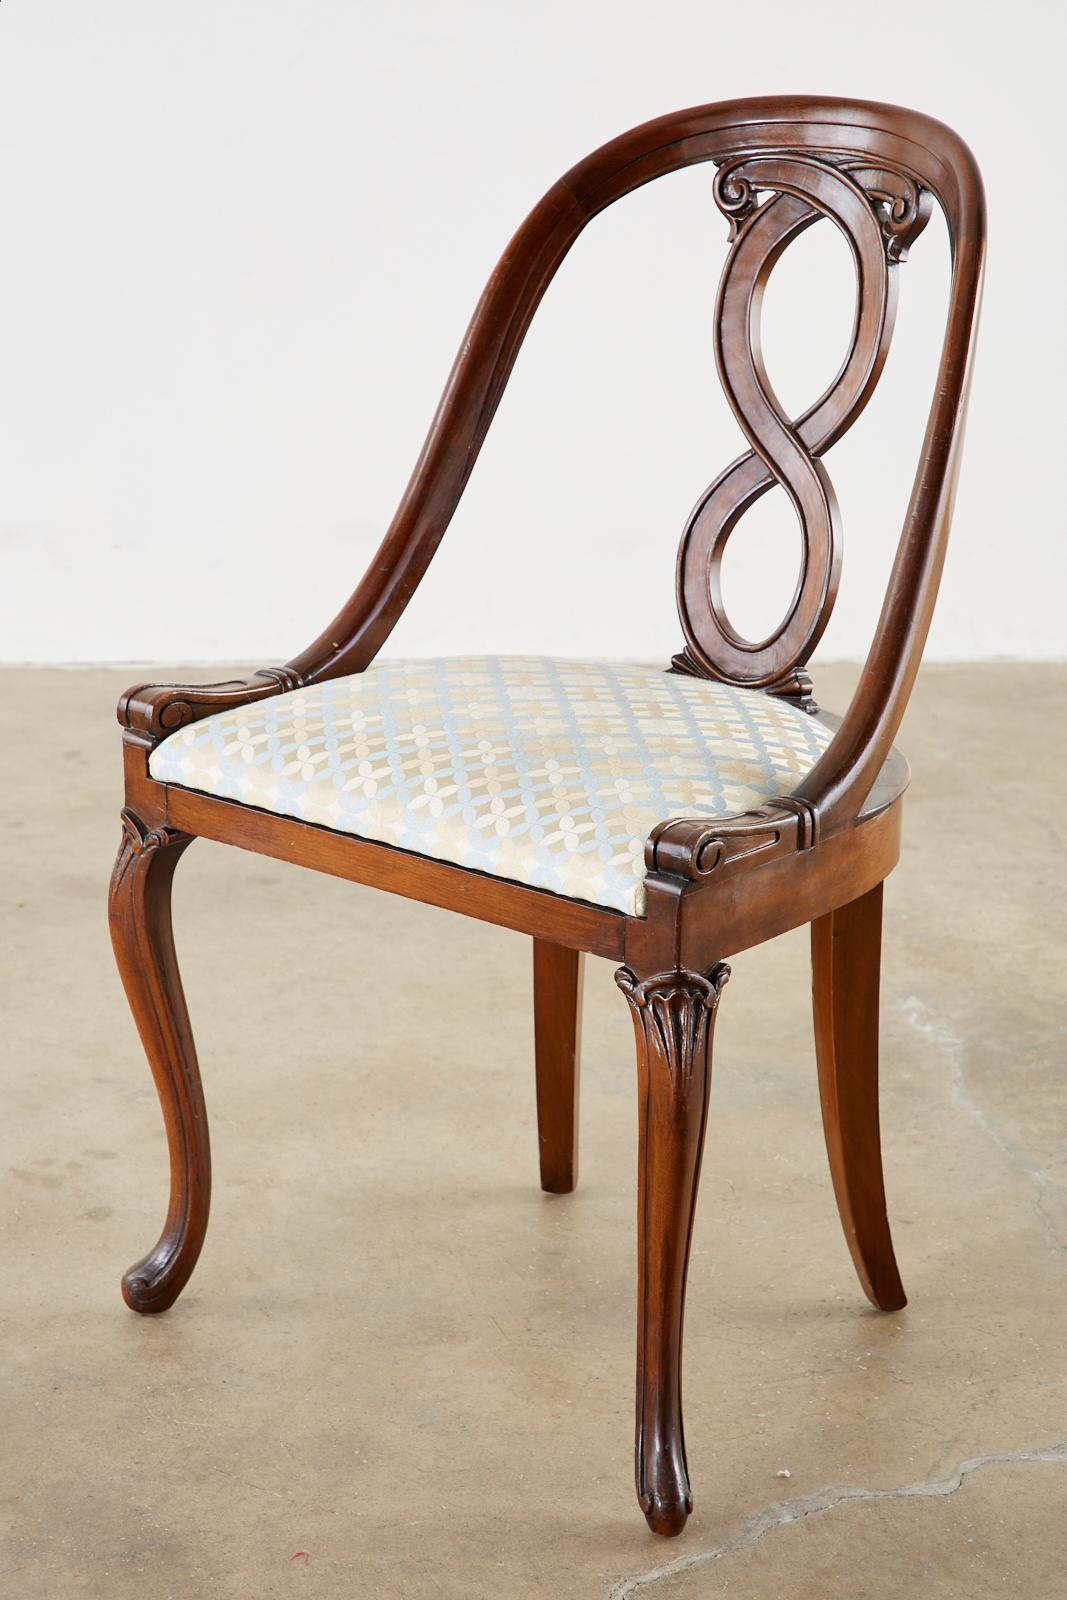 Distinctive pair of English regency chairs featuring a spoon back form. Constructed from mahogany with a carved ribbon design back splat. Supported by graceful cabriole legs in the front. Newer upholstery with a geometric design brocade fabric in a